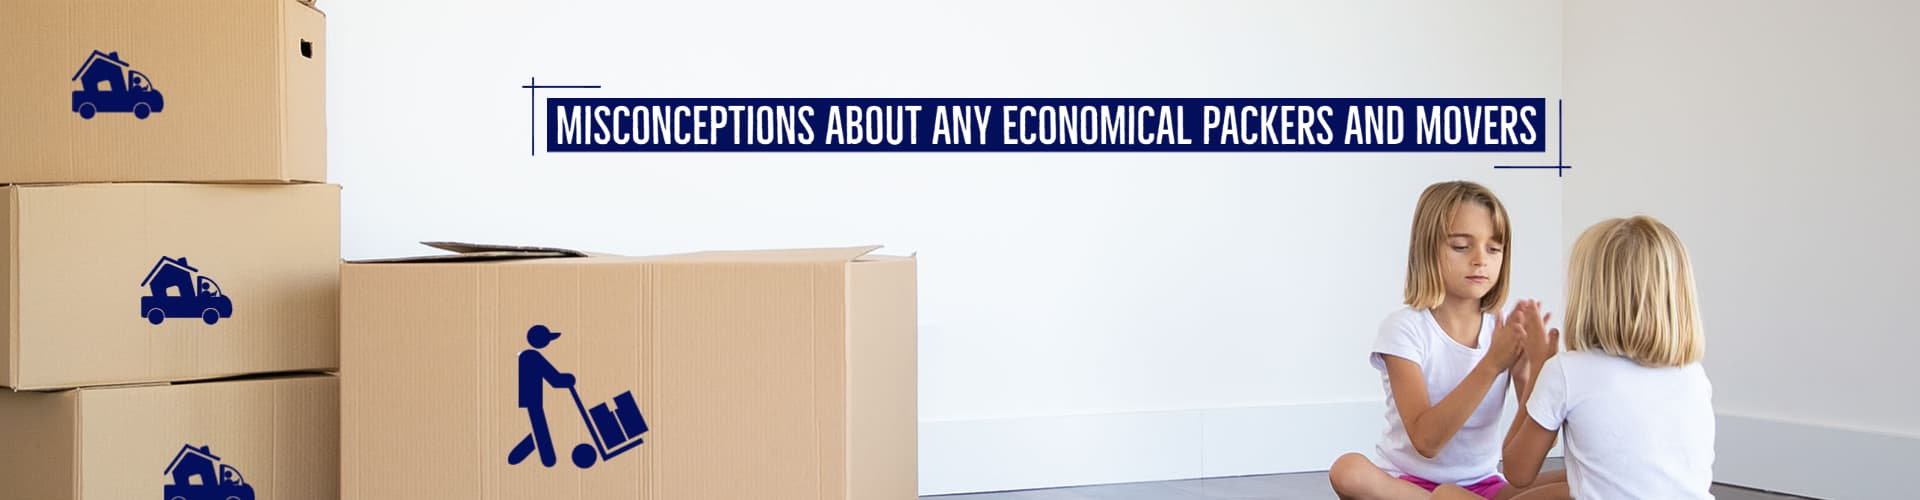 Misconceptions About Any Economical Packers And Movers